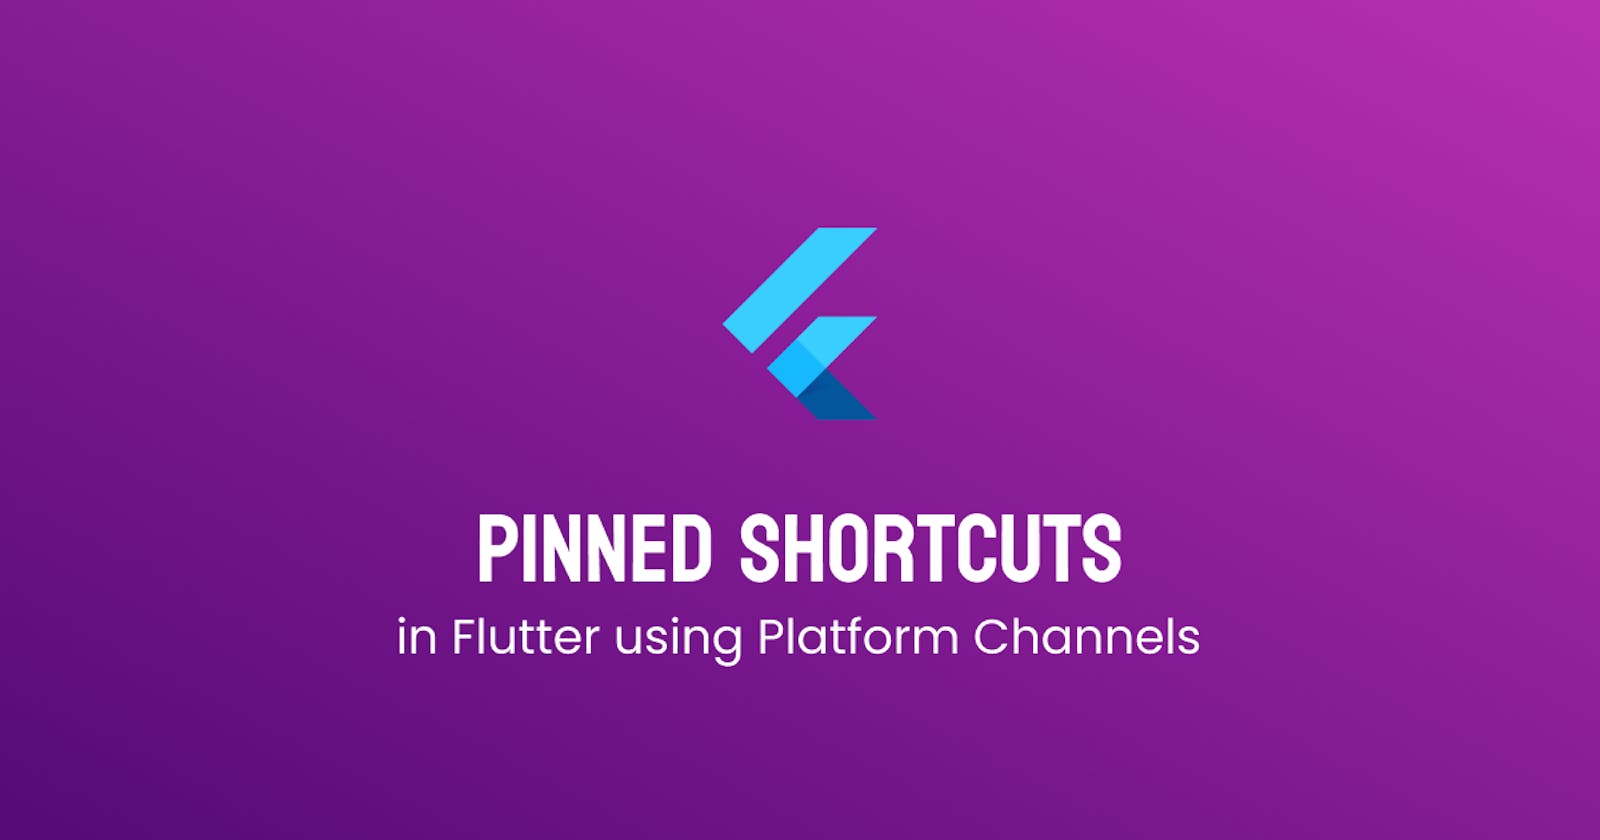 Creating pinned shortcuts in Flutter!